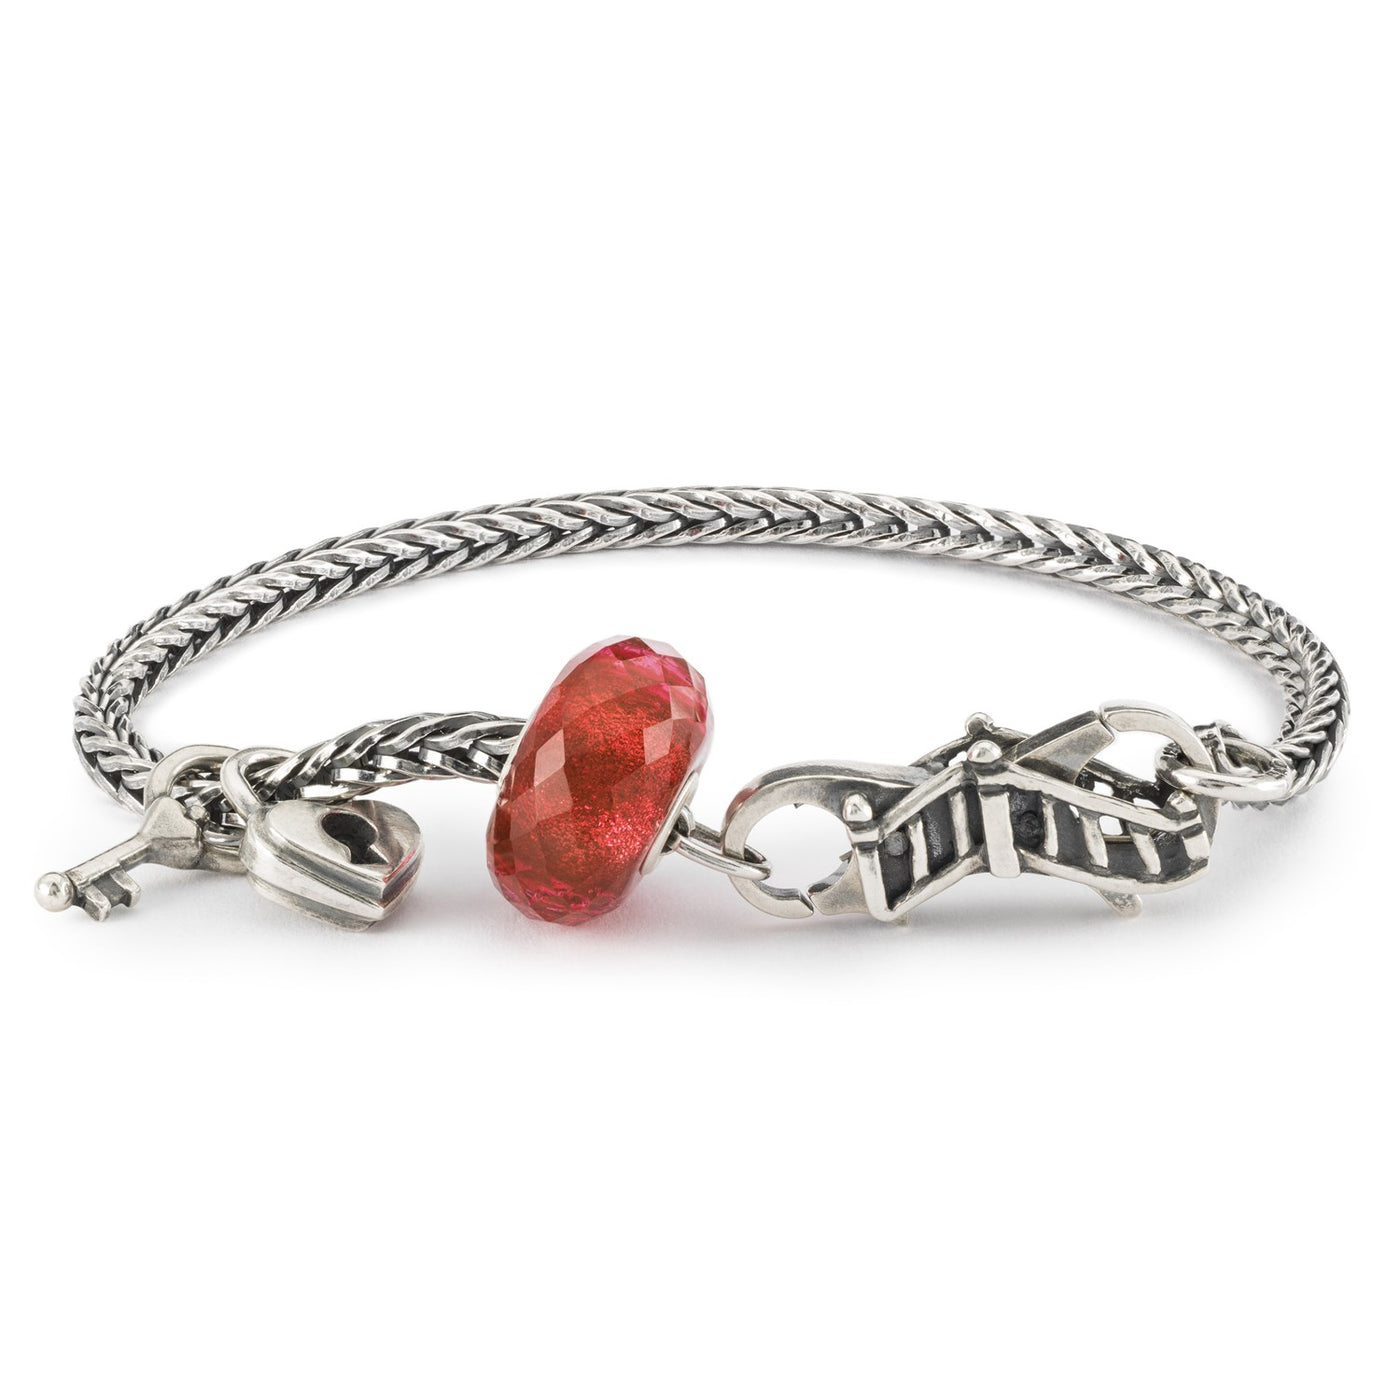 Trollbeads - Have you tried the Bracelet Helper? 👍 A handmade tool in wood  that helps you fasten your bracelet by yourself. Just clip it onto the ring  side of the clasp